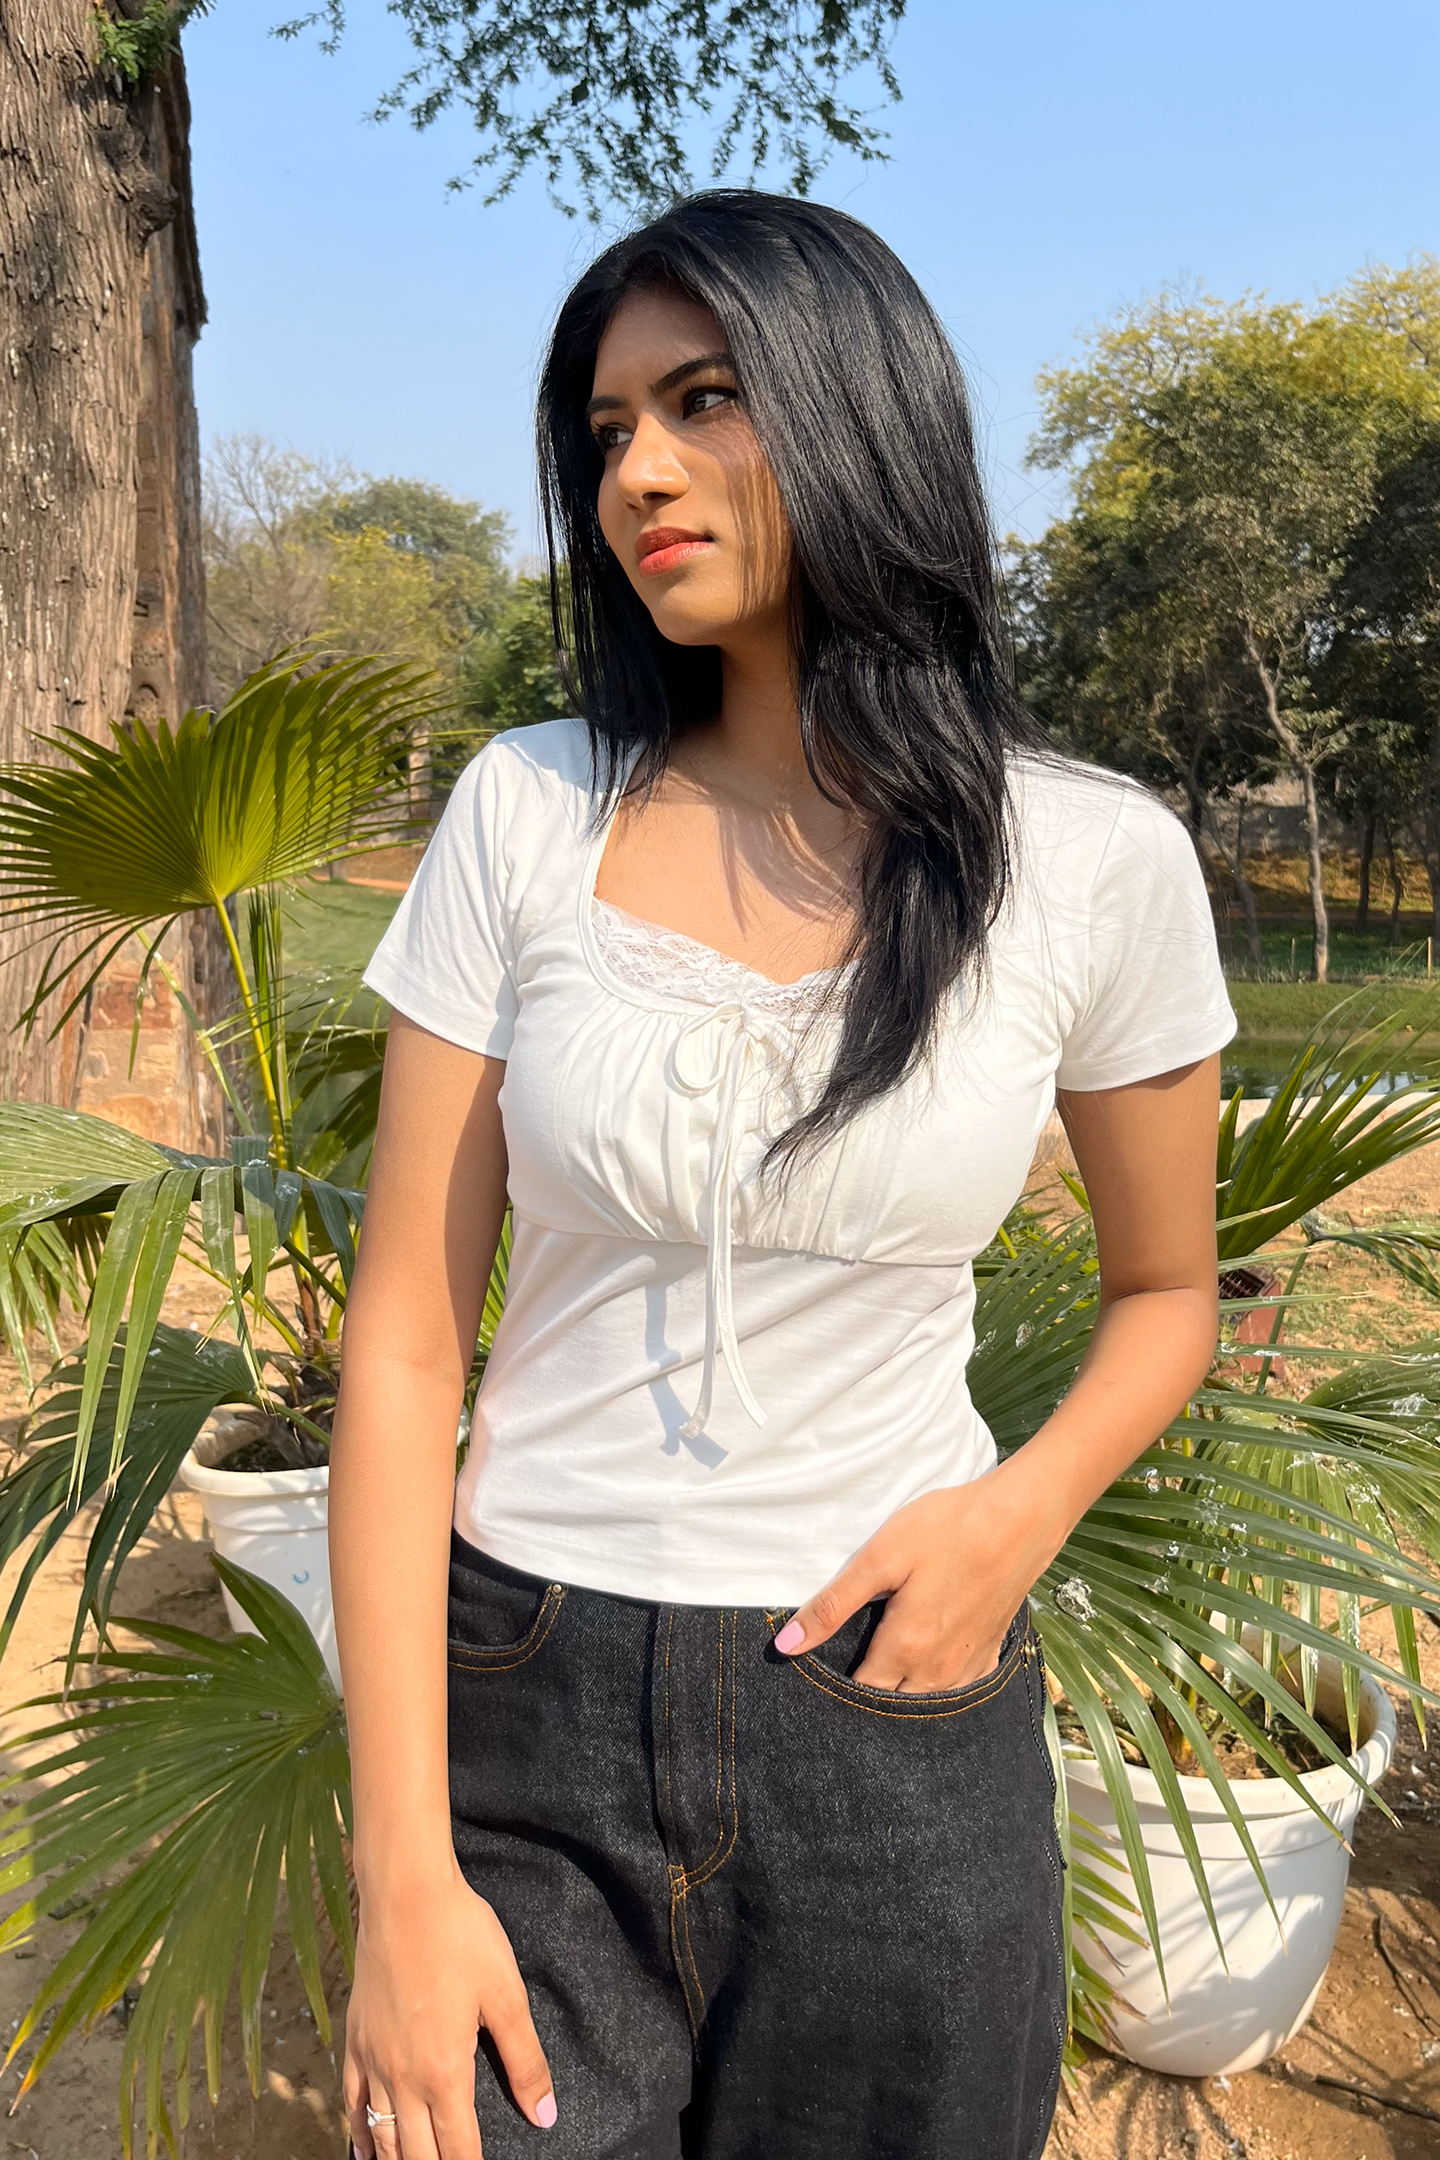 A delicate, lace-trimmed white top by Ronazen, featuring intricate lace detailing along the neckline and sleeves. The top is made from a light, breathable fabric, ideal for a graceful, feminine look. The lace trim adds a touch of elegance, making it suitable for both casual and more formal occasions. The design is simple yet sophisticated, with a slightly fitted silhouette that flatters the figure